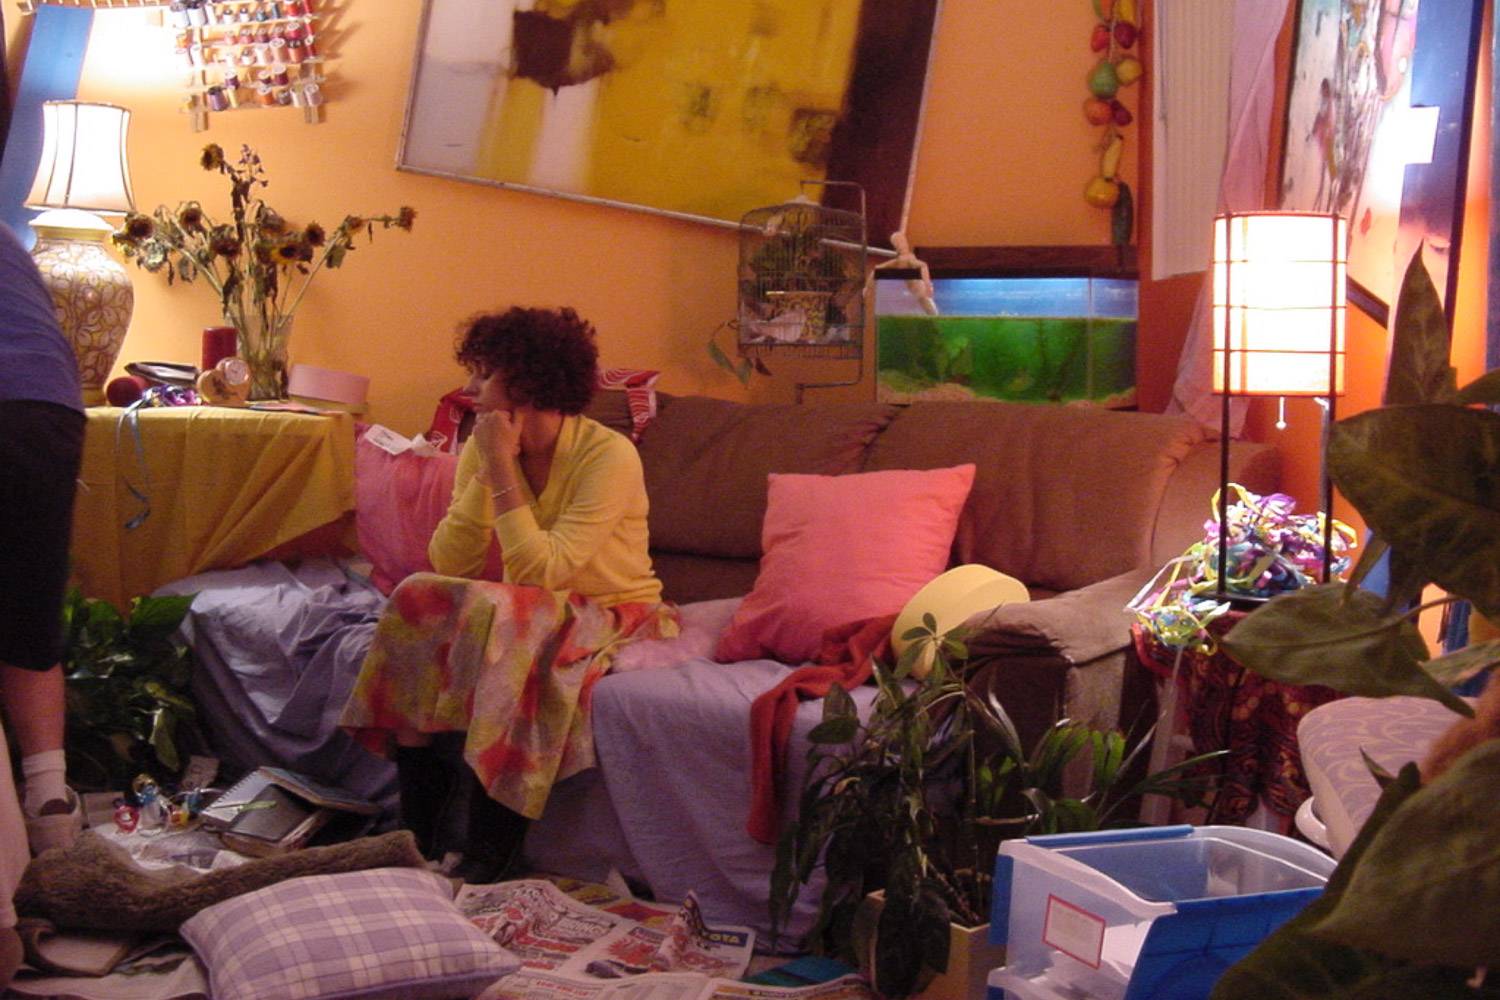 Image of a woman sitting on a couch in a messy and chaotic room 